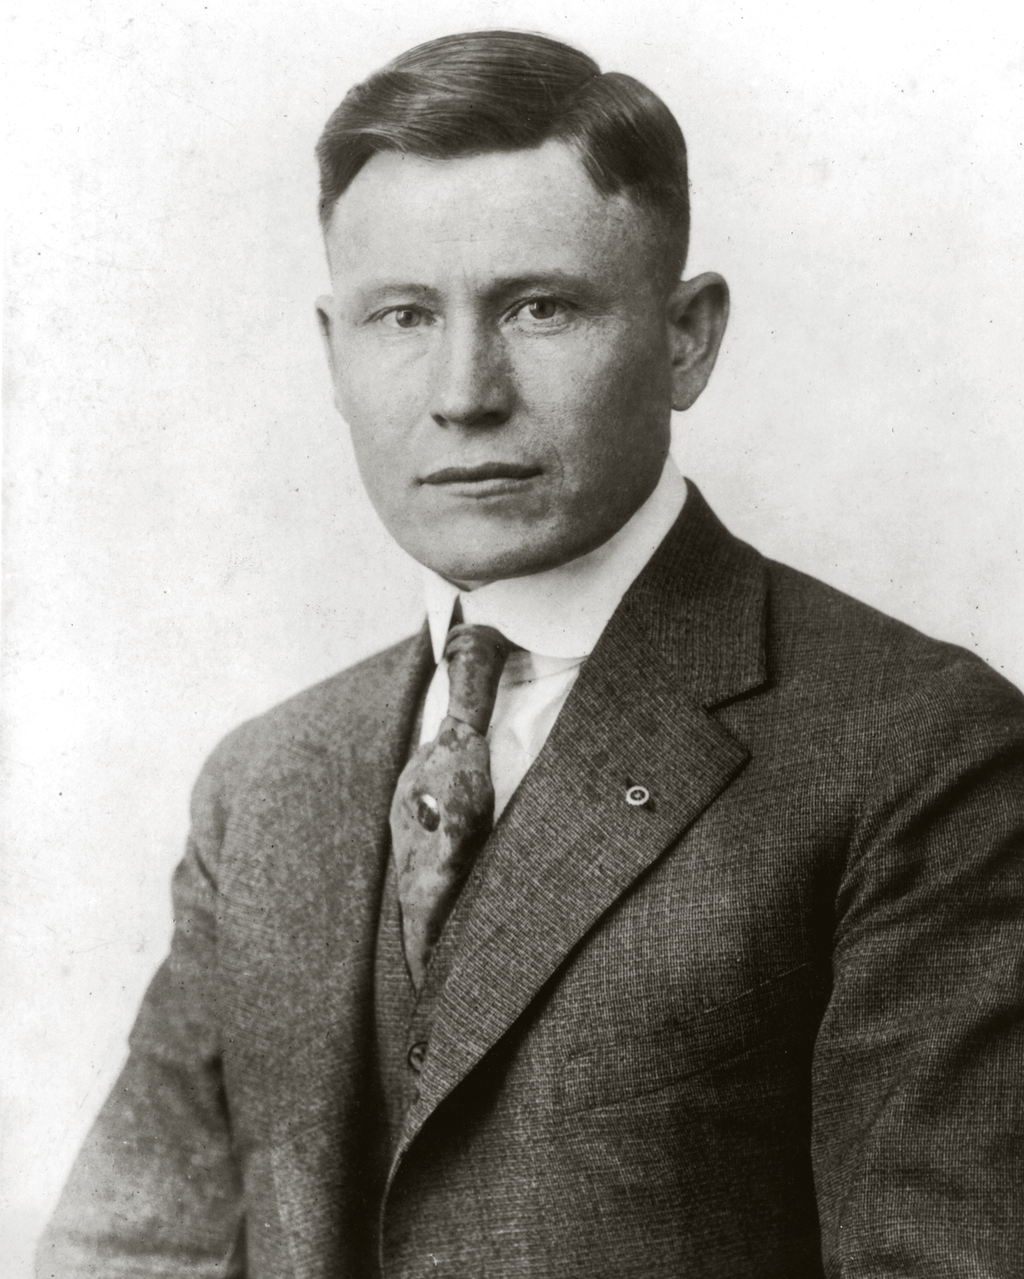 Portrait of KFC founder Harland Sanders as a young man, circa 1914.